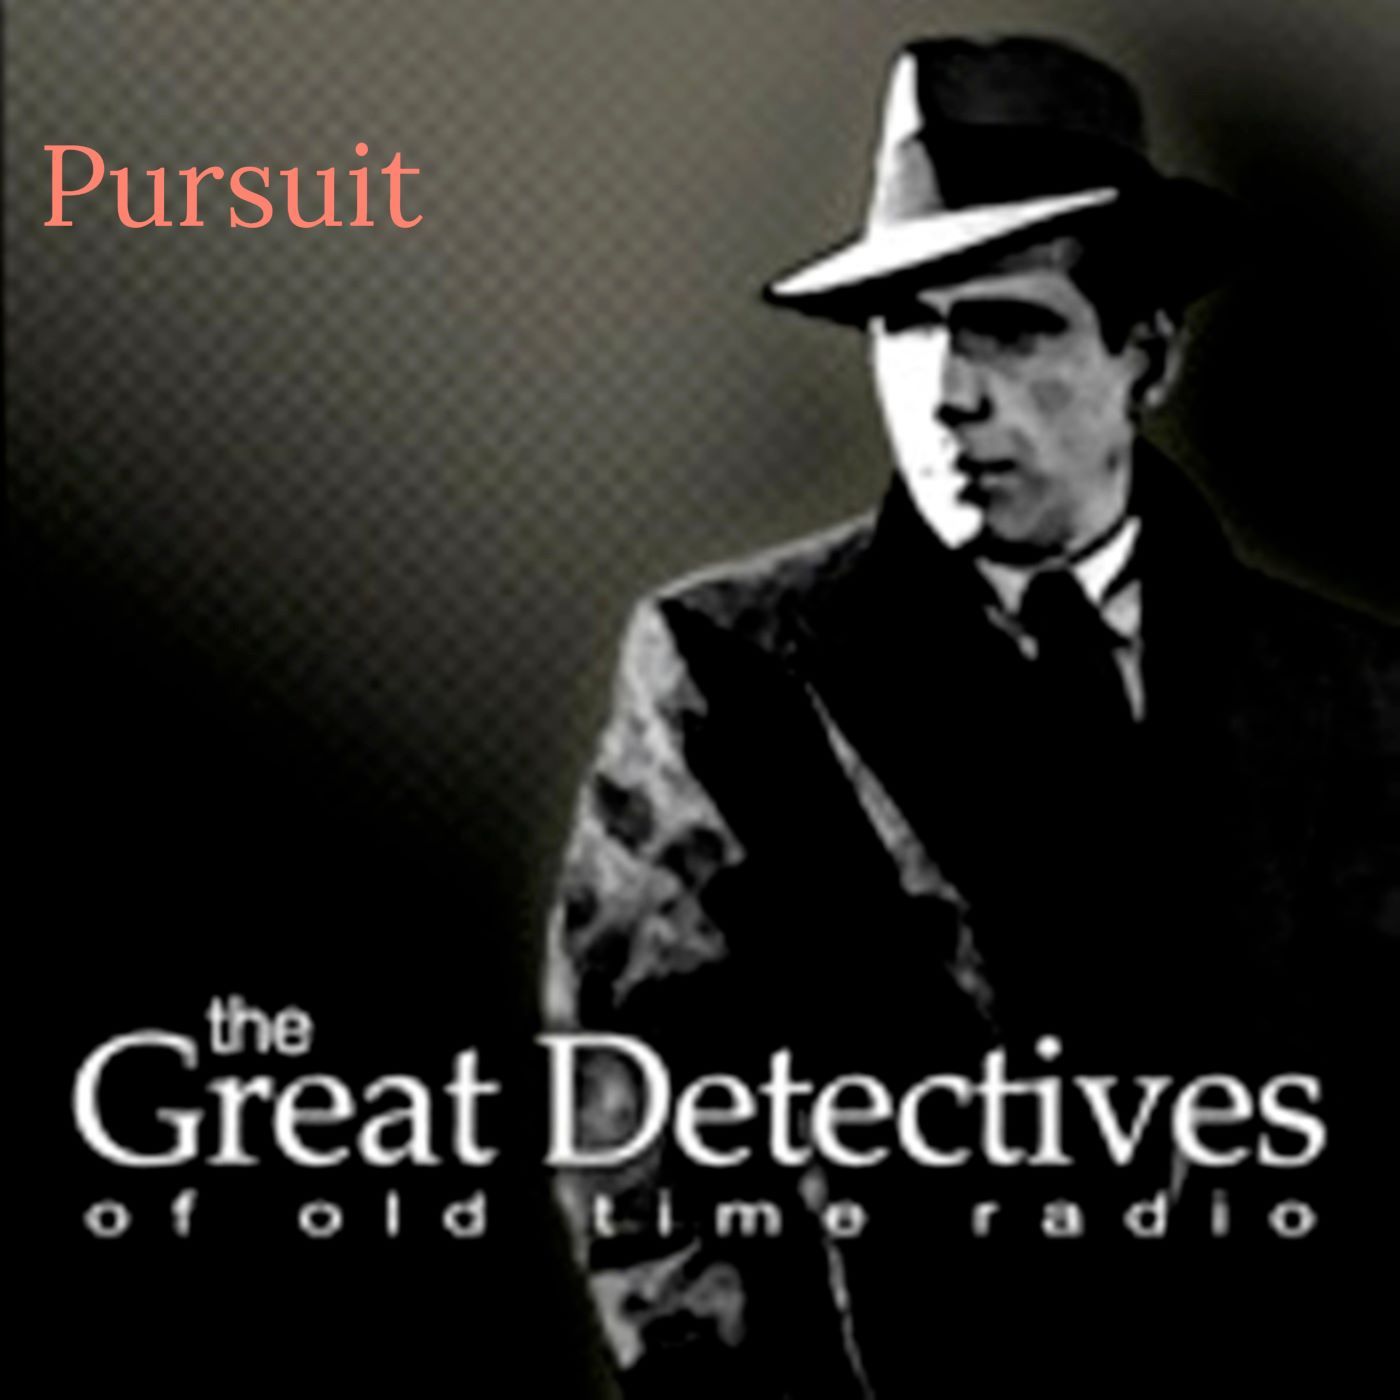 Pursuit – The Great Detectives of Old Time Radio